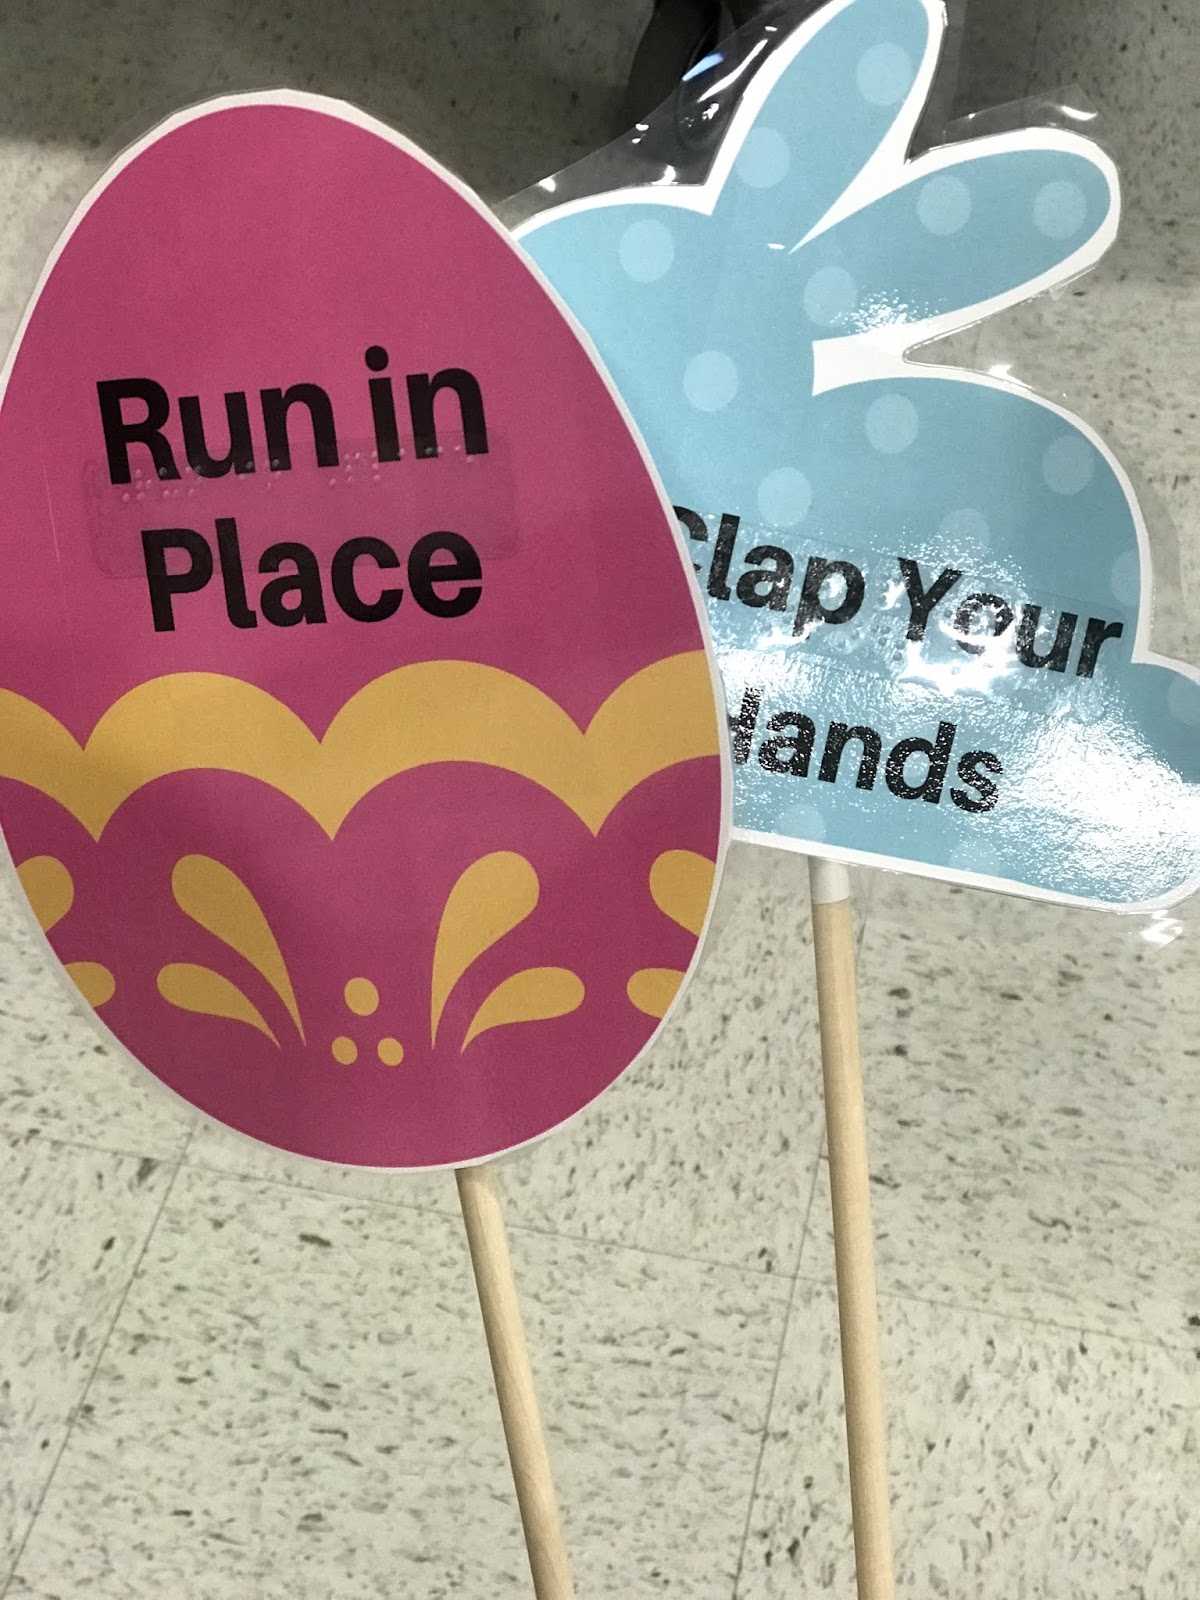 a close up of the motor activity signs "run in place" "clap your hands"